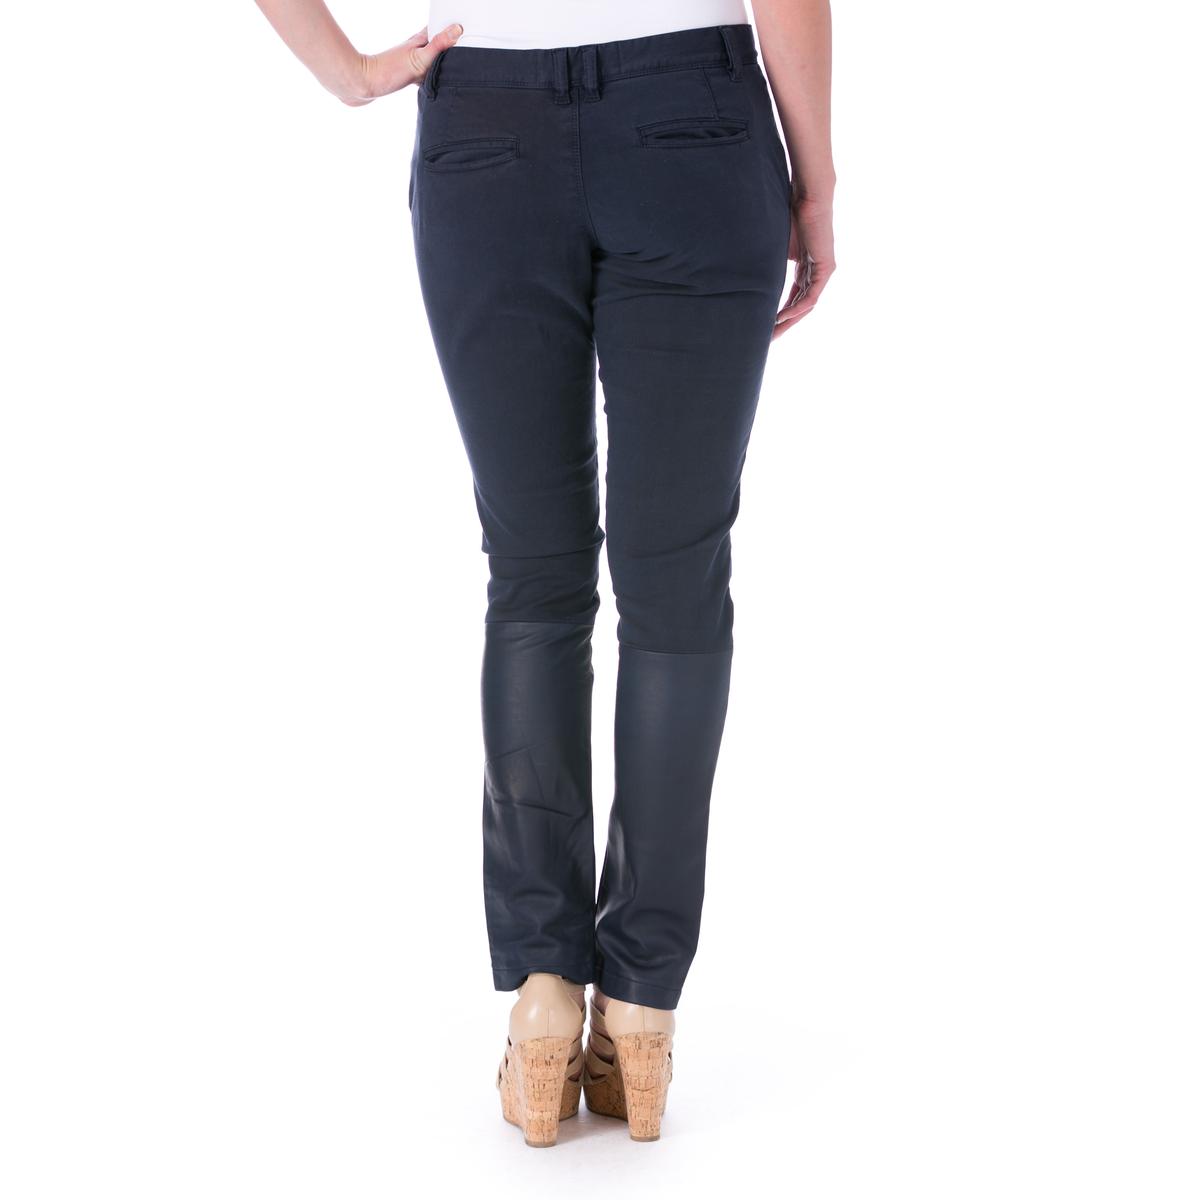 Each x Other Womens Navy Faux Leather Flat Front Skinny Pants 26 BHFO ...